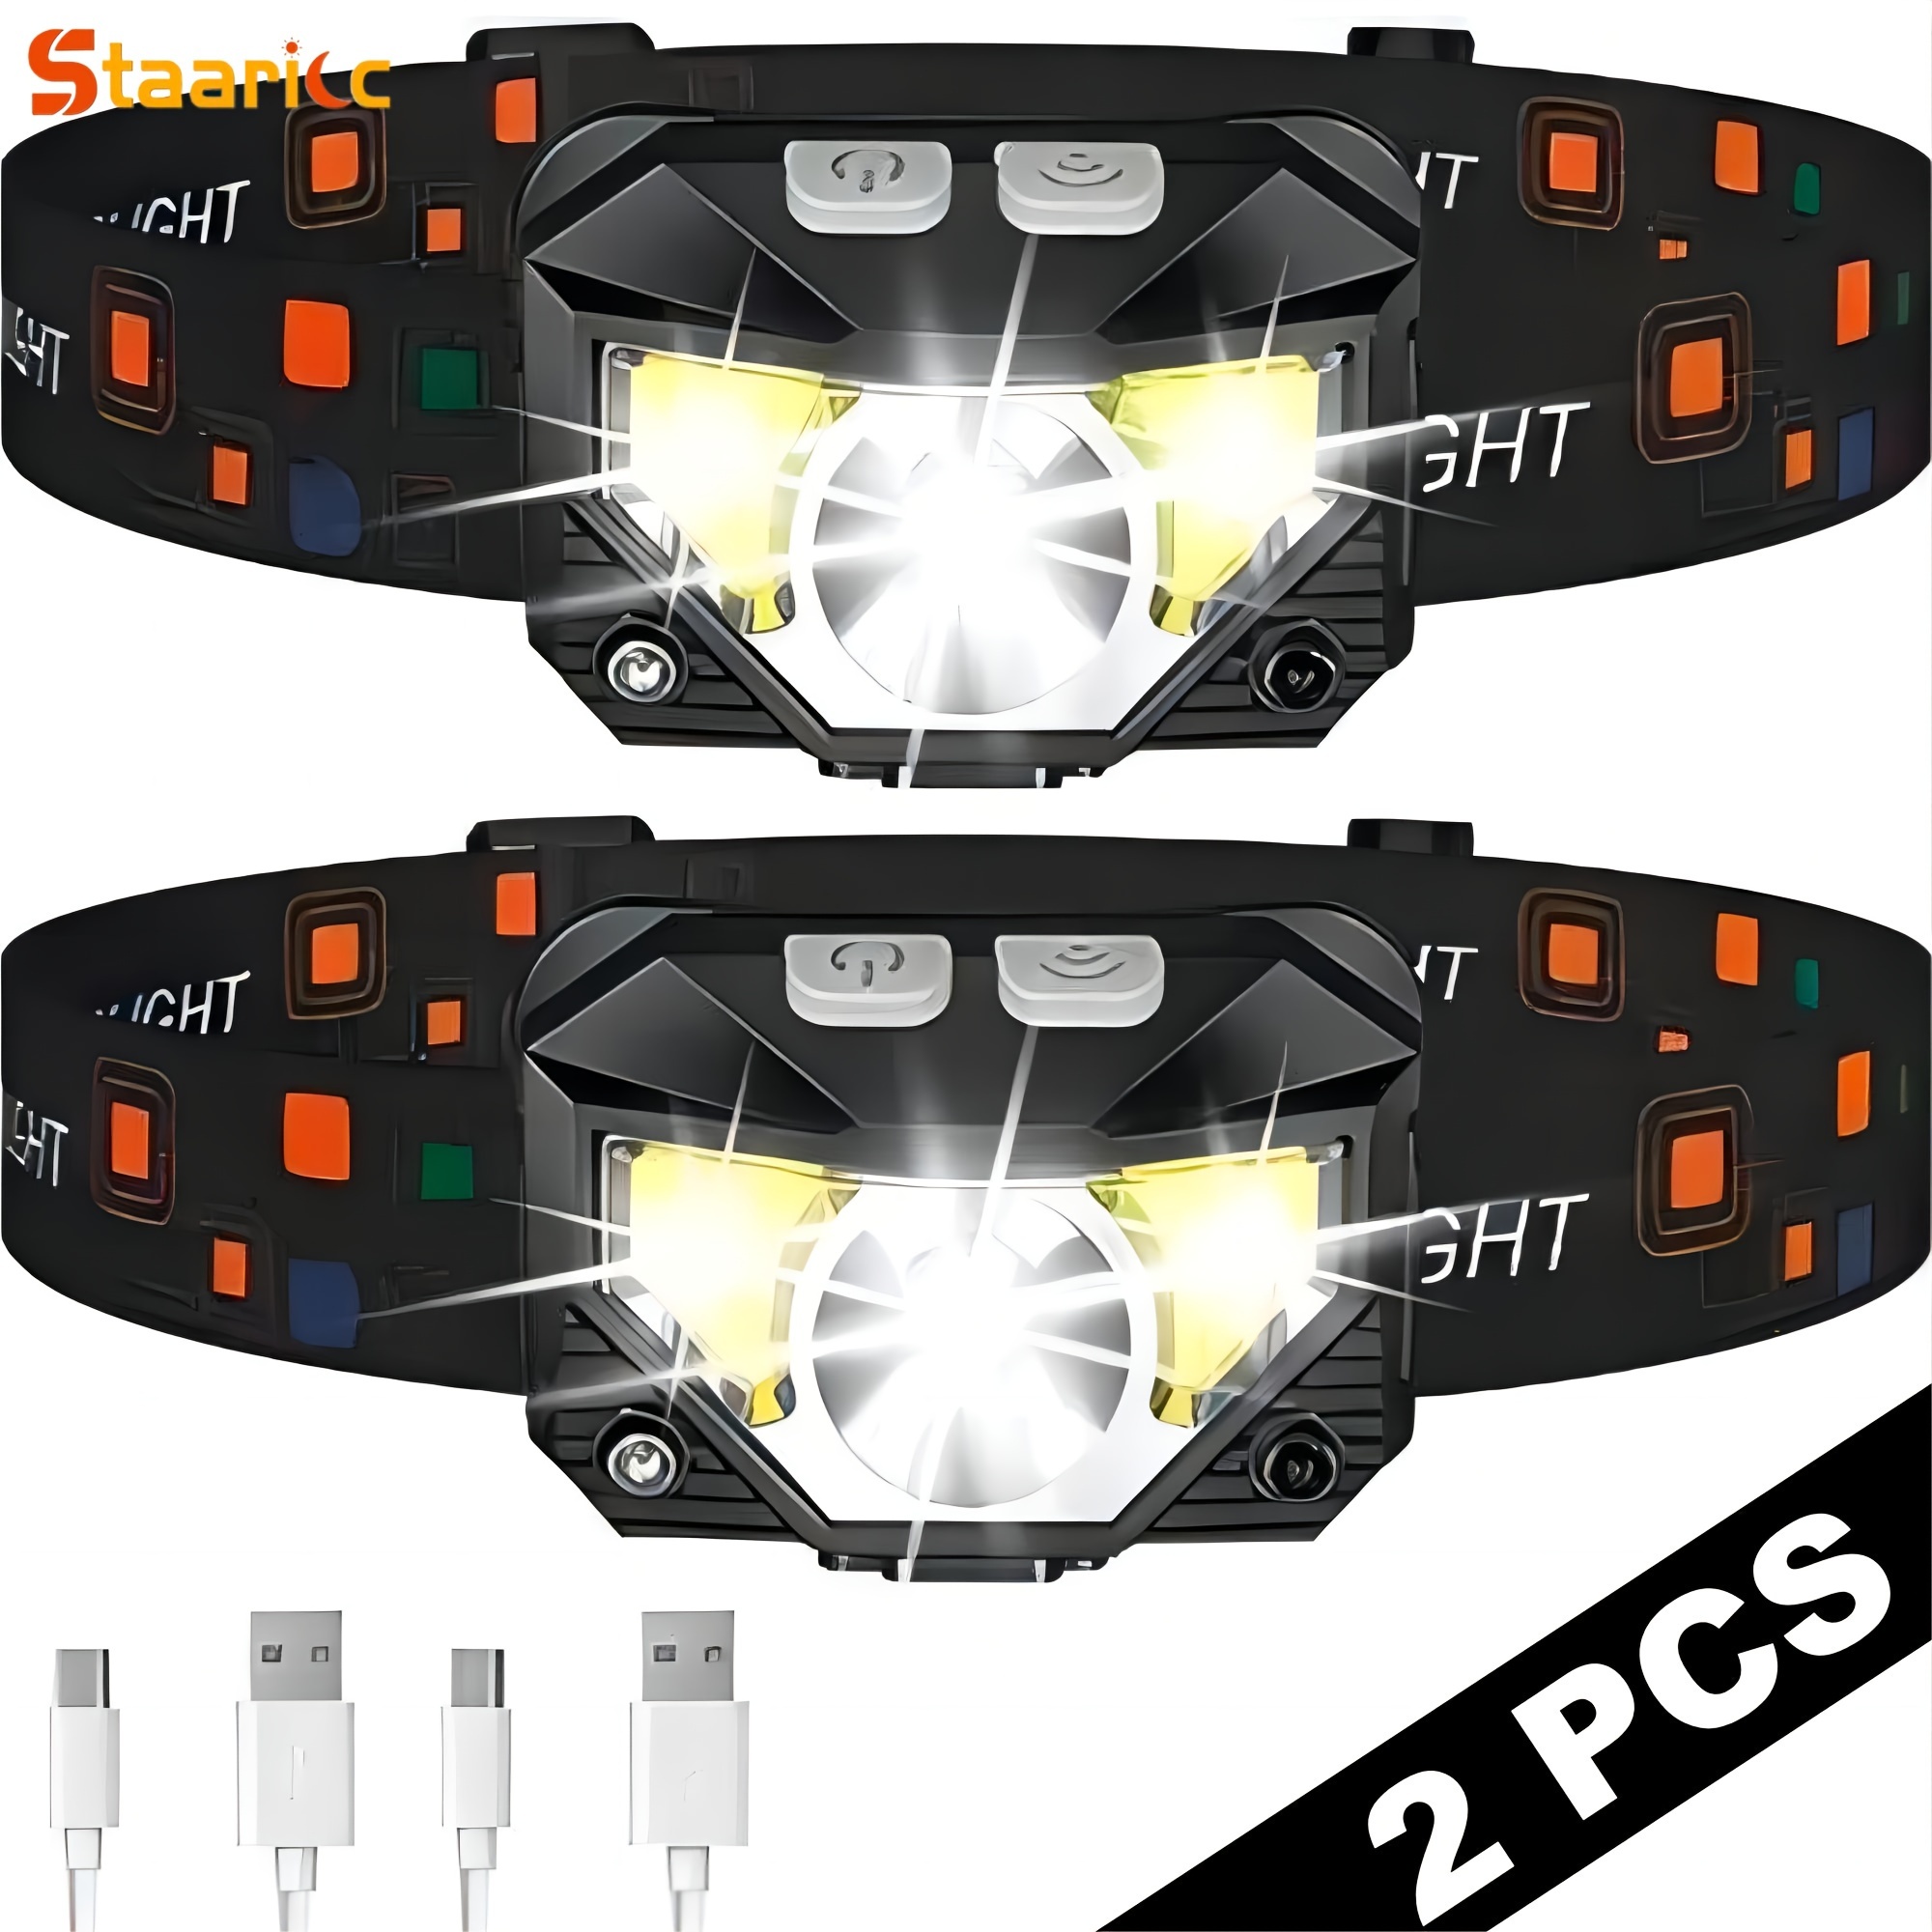 

2pcs 1200 Lumens Ultra Bright Led Rechargeable Headlight, Xpg+cob Headlamp Flashlight With Red And White Light, Waterproof Motion Sensor, 8 Modes For Outdoor Camping, Running, Fishing, Emergency